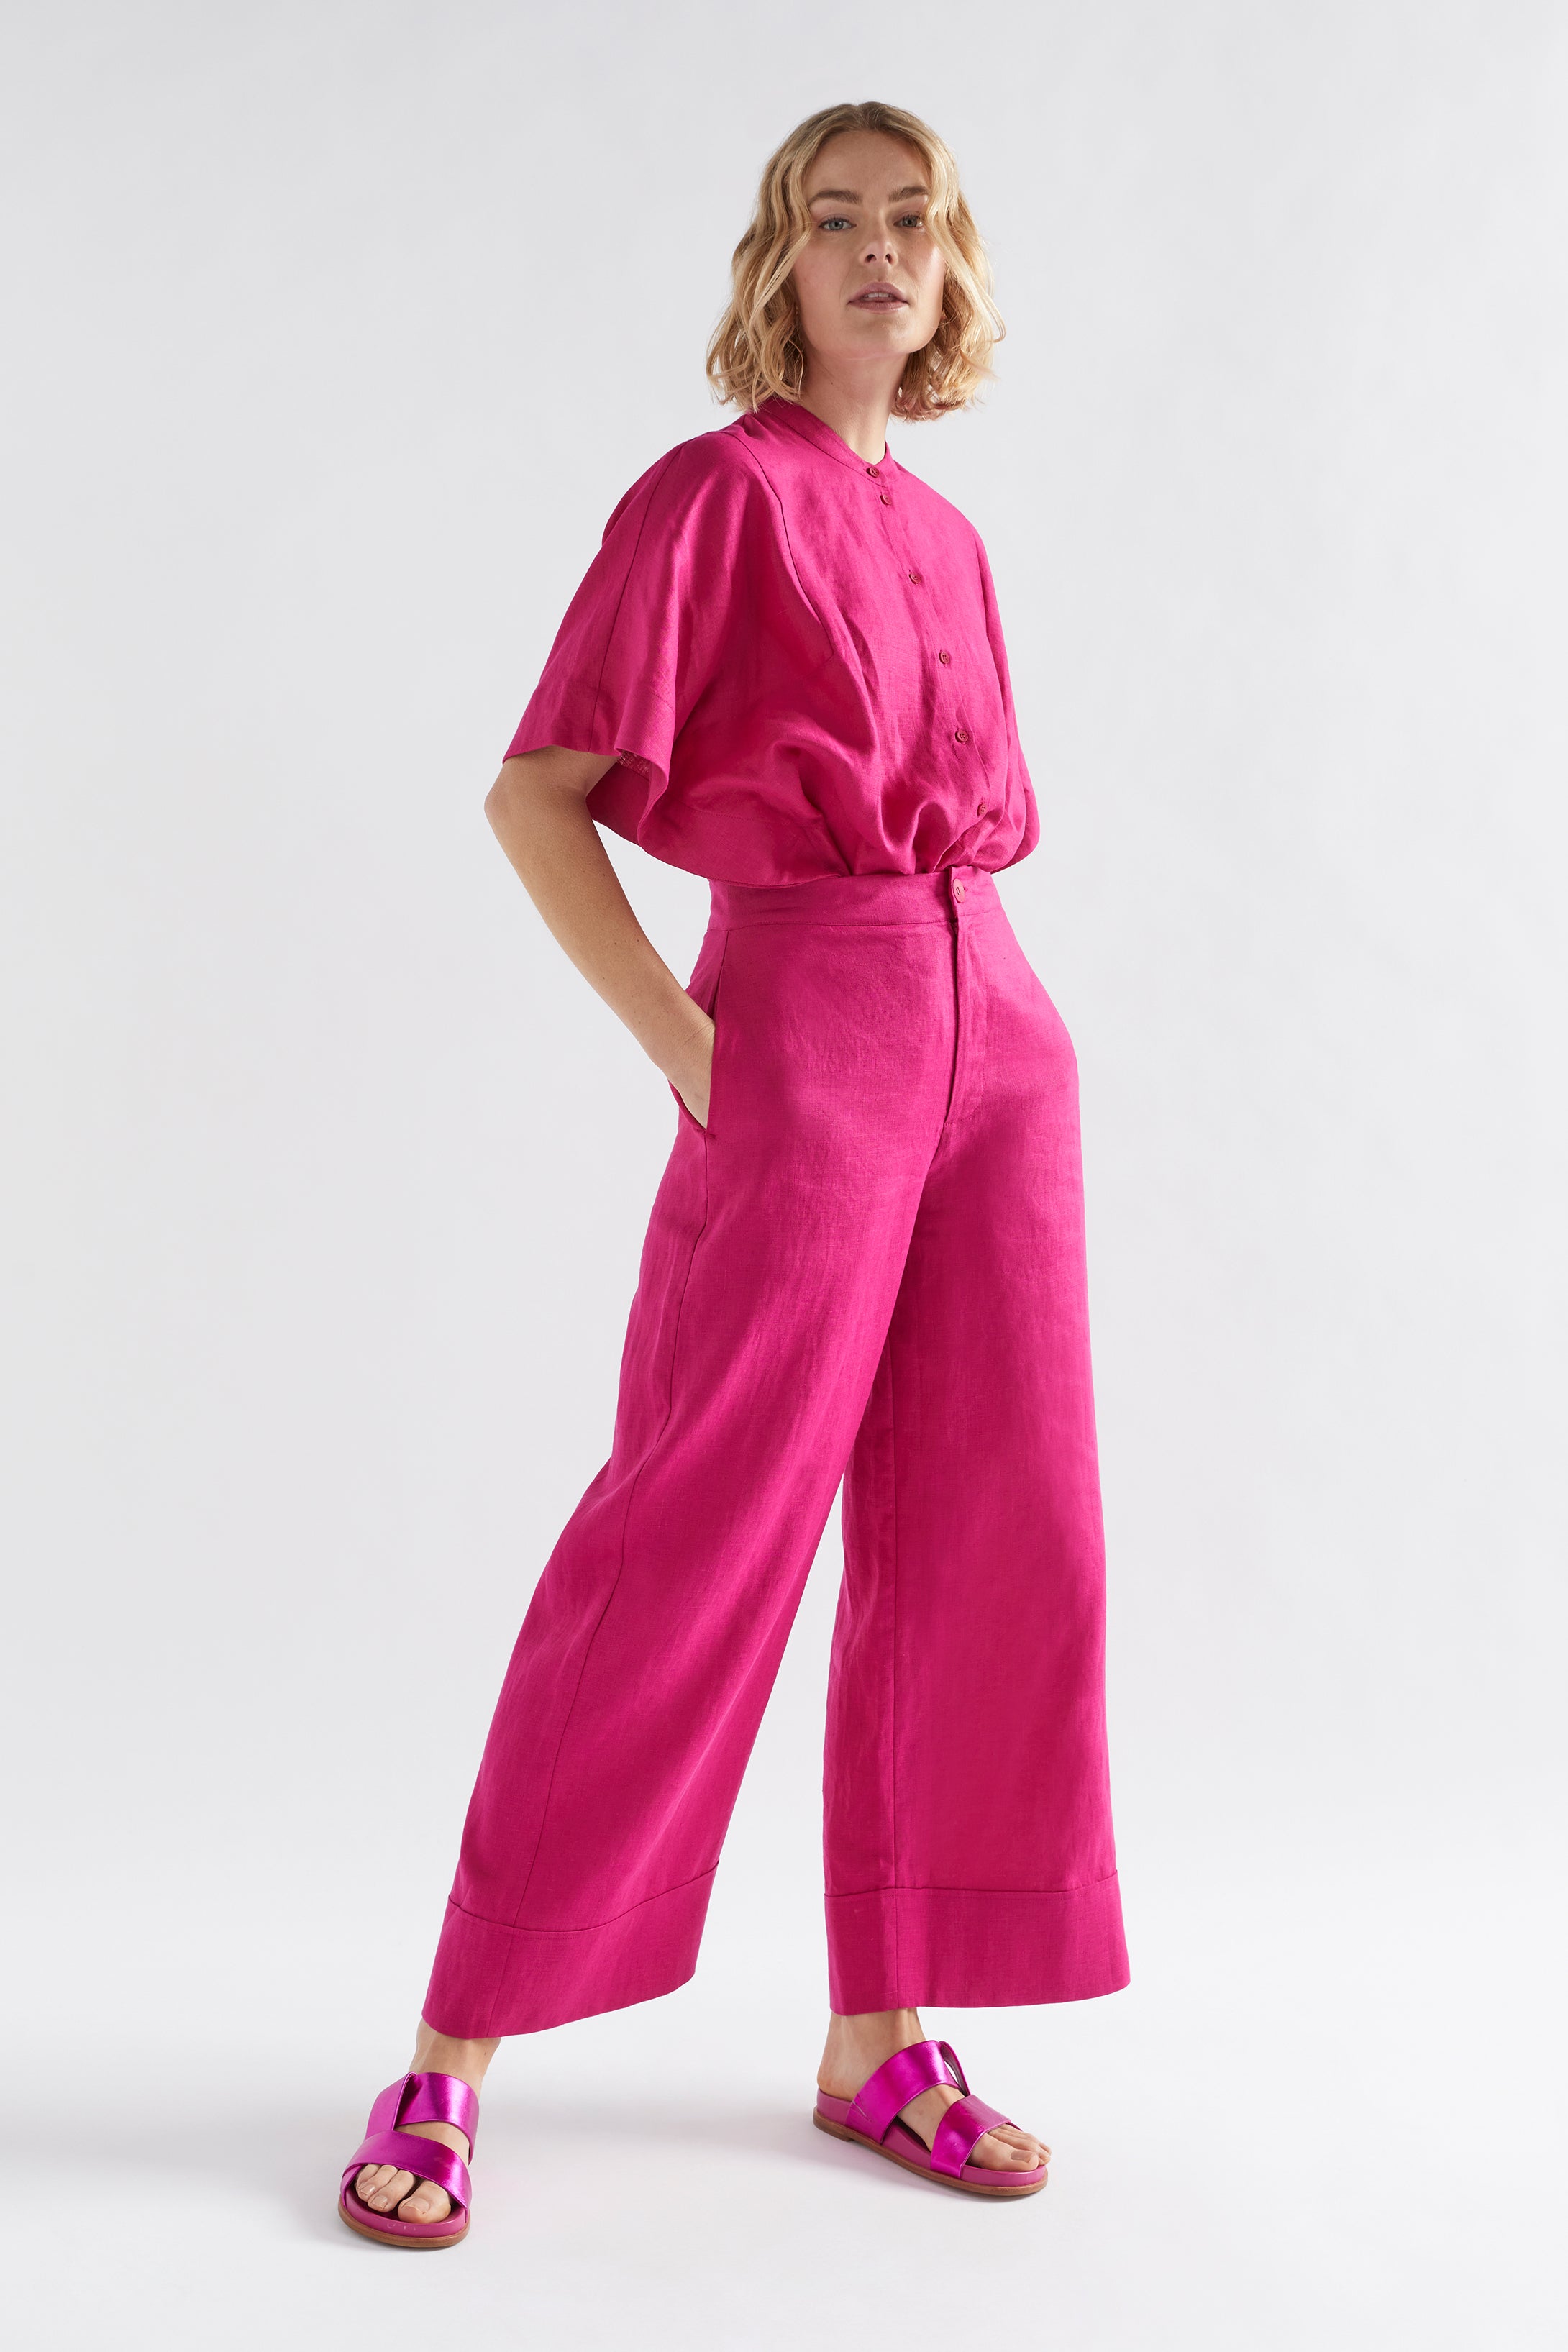 GRLFRND Cameron Trousers in Bright Pink | REVOLVE